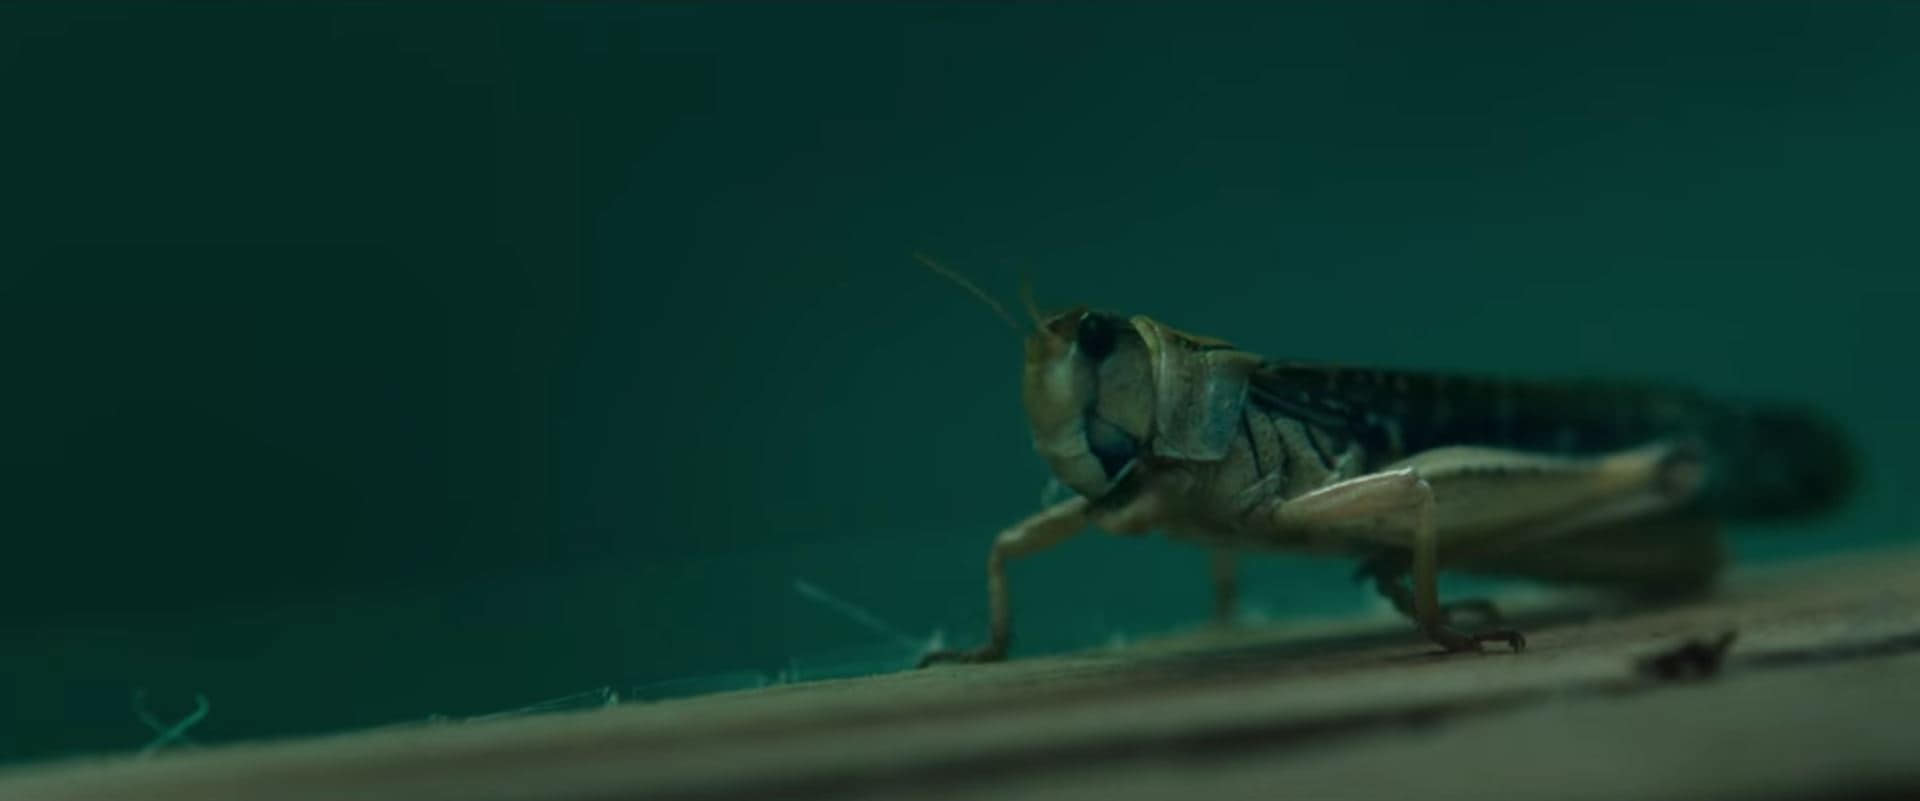 A locust from The Swarm (2021)